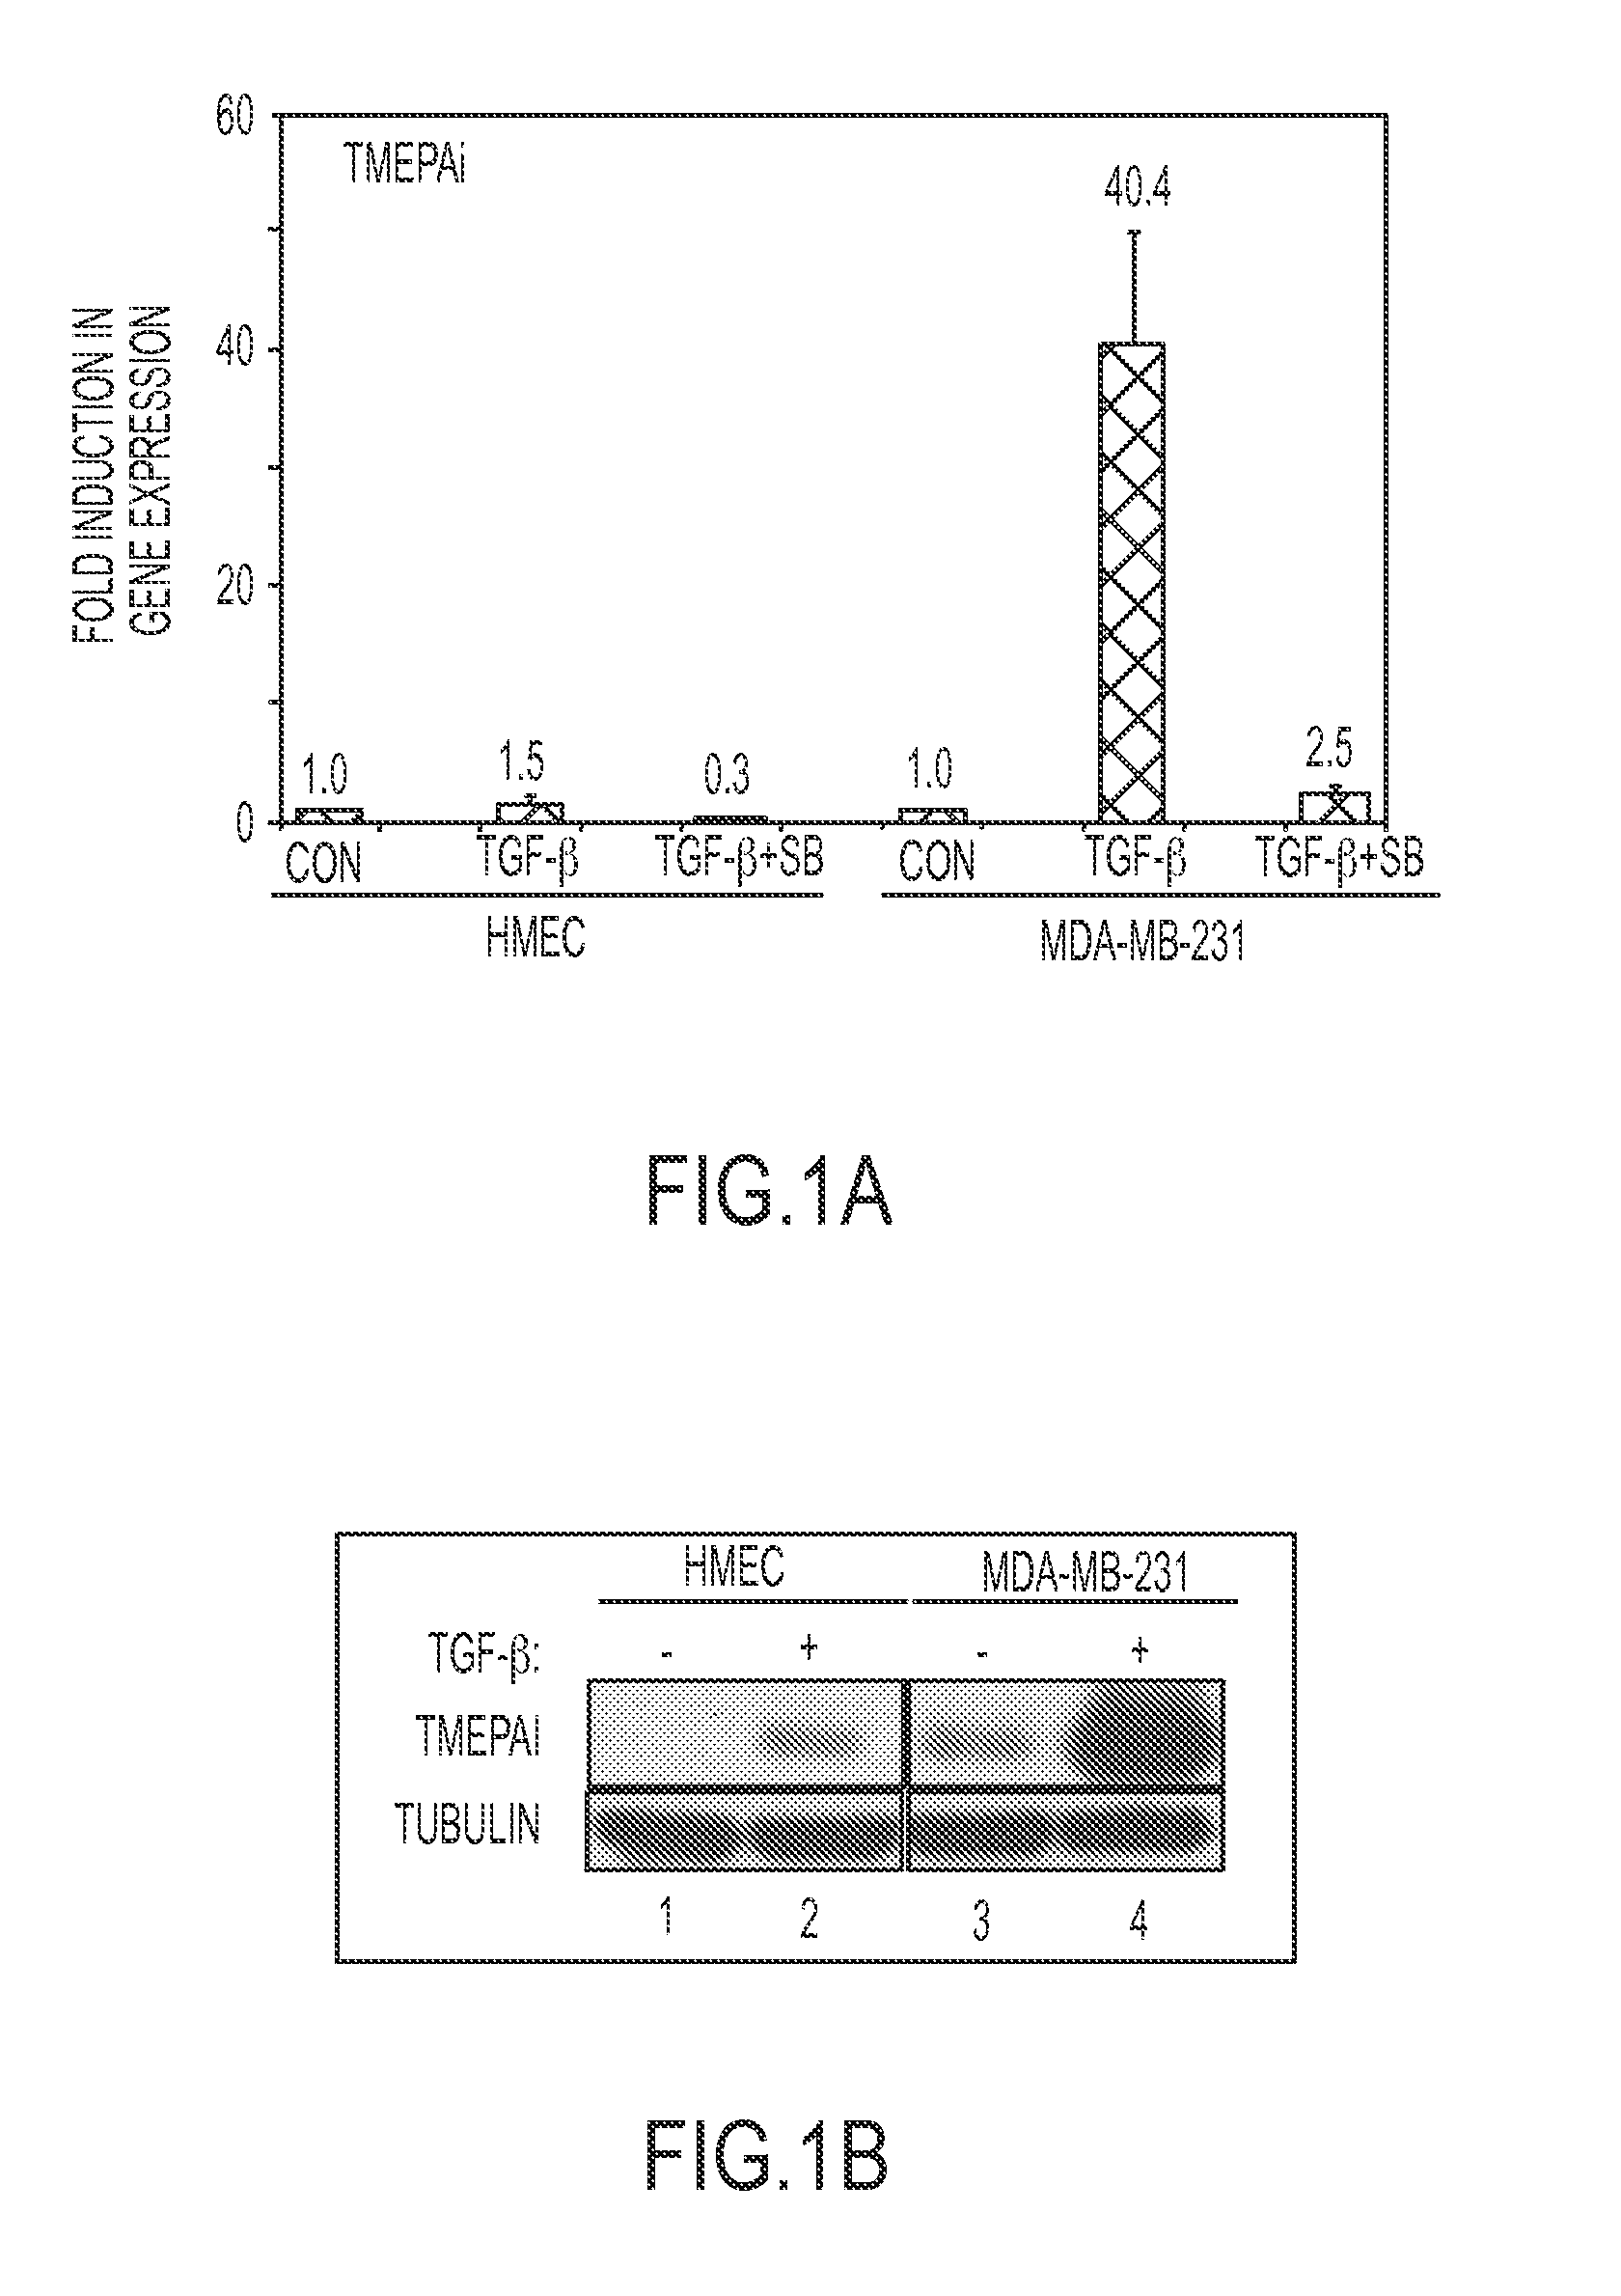 Methods for classifying a cancer as susceptible to tmepai-directed therapies and treating such cancers